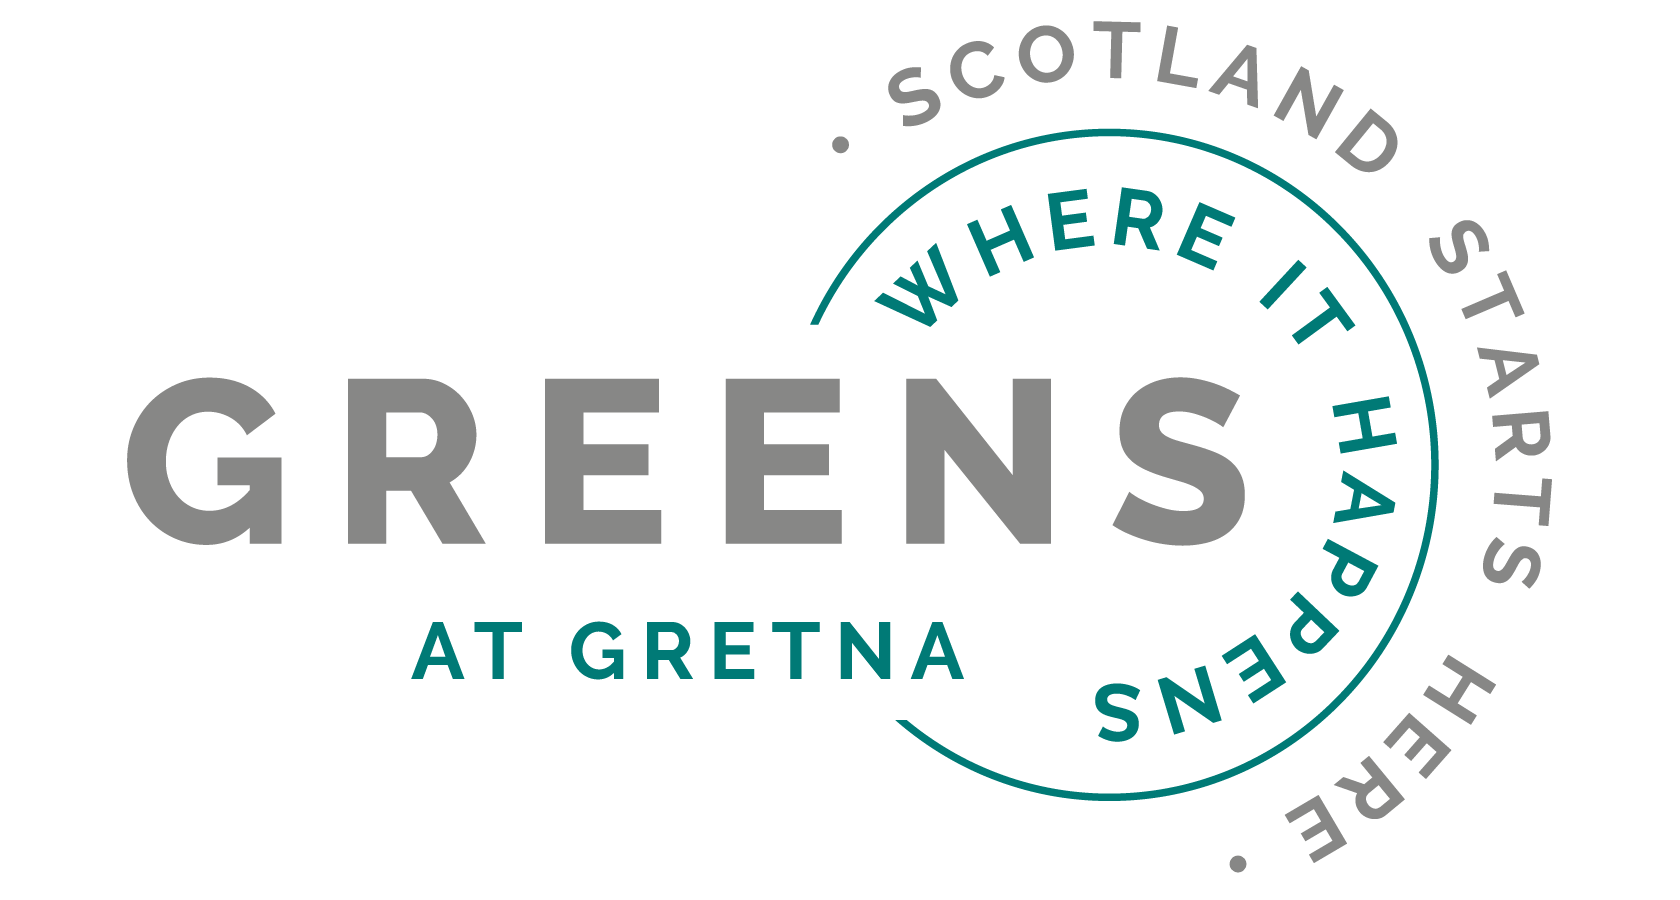 'GREENS AT GRETNA' – First Hotel in Scotland